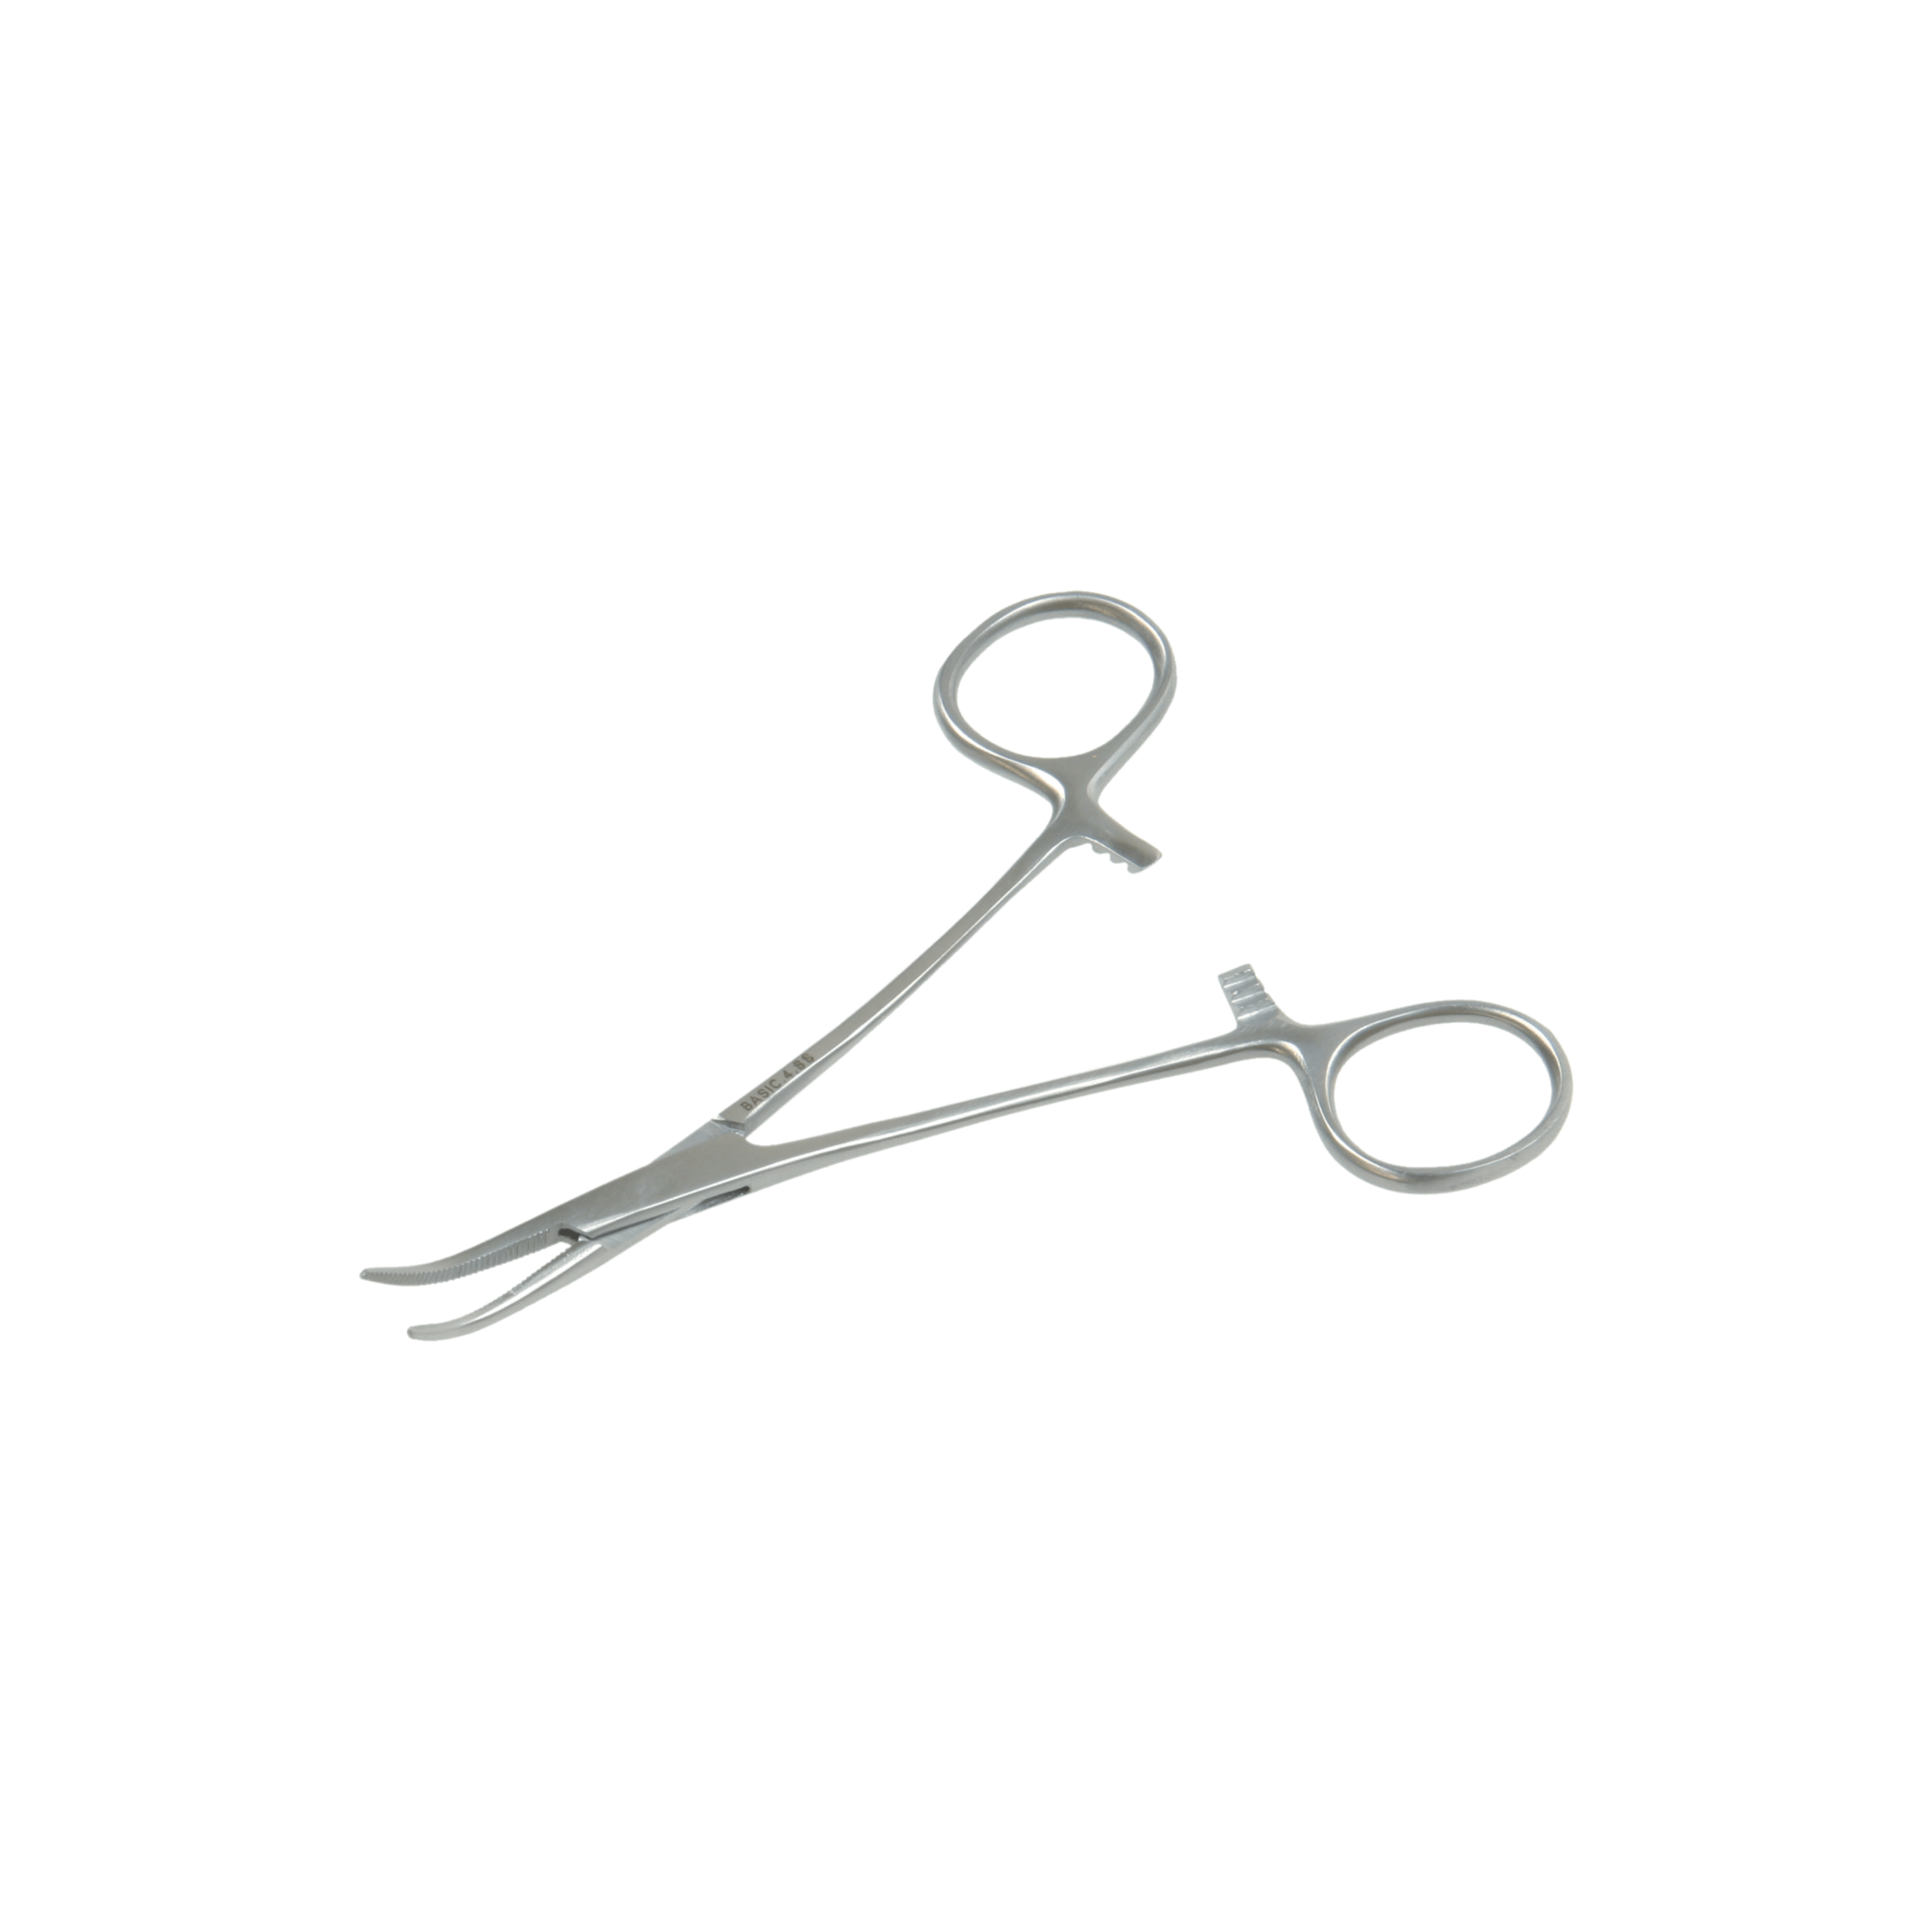 Basic Mosquito Artery Forceps- Curved, 12.5 cm